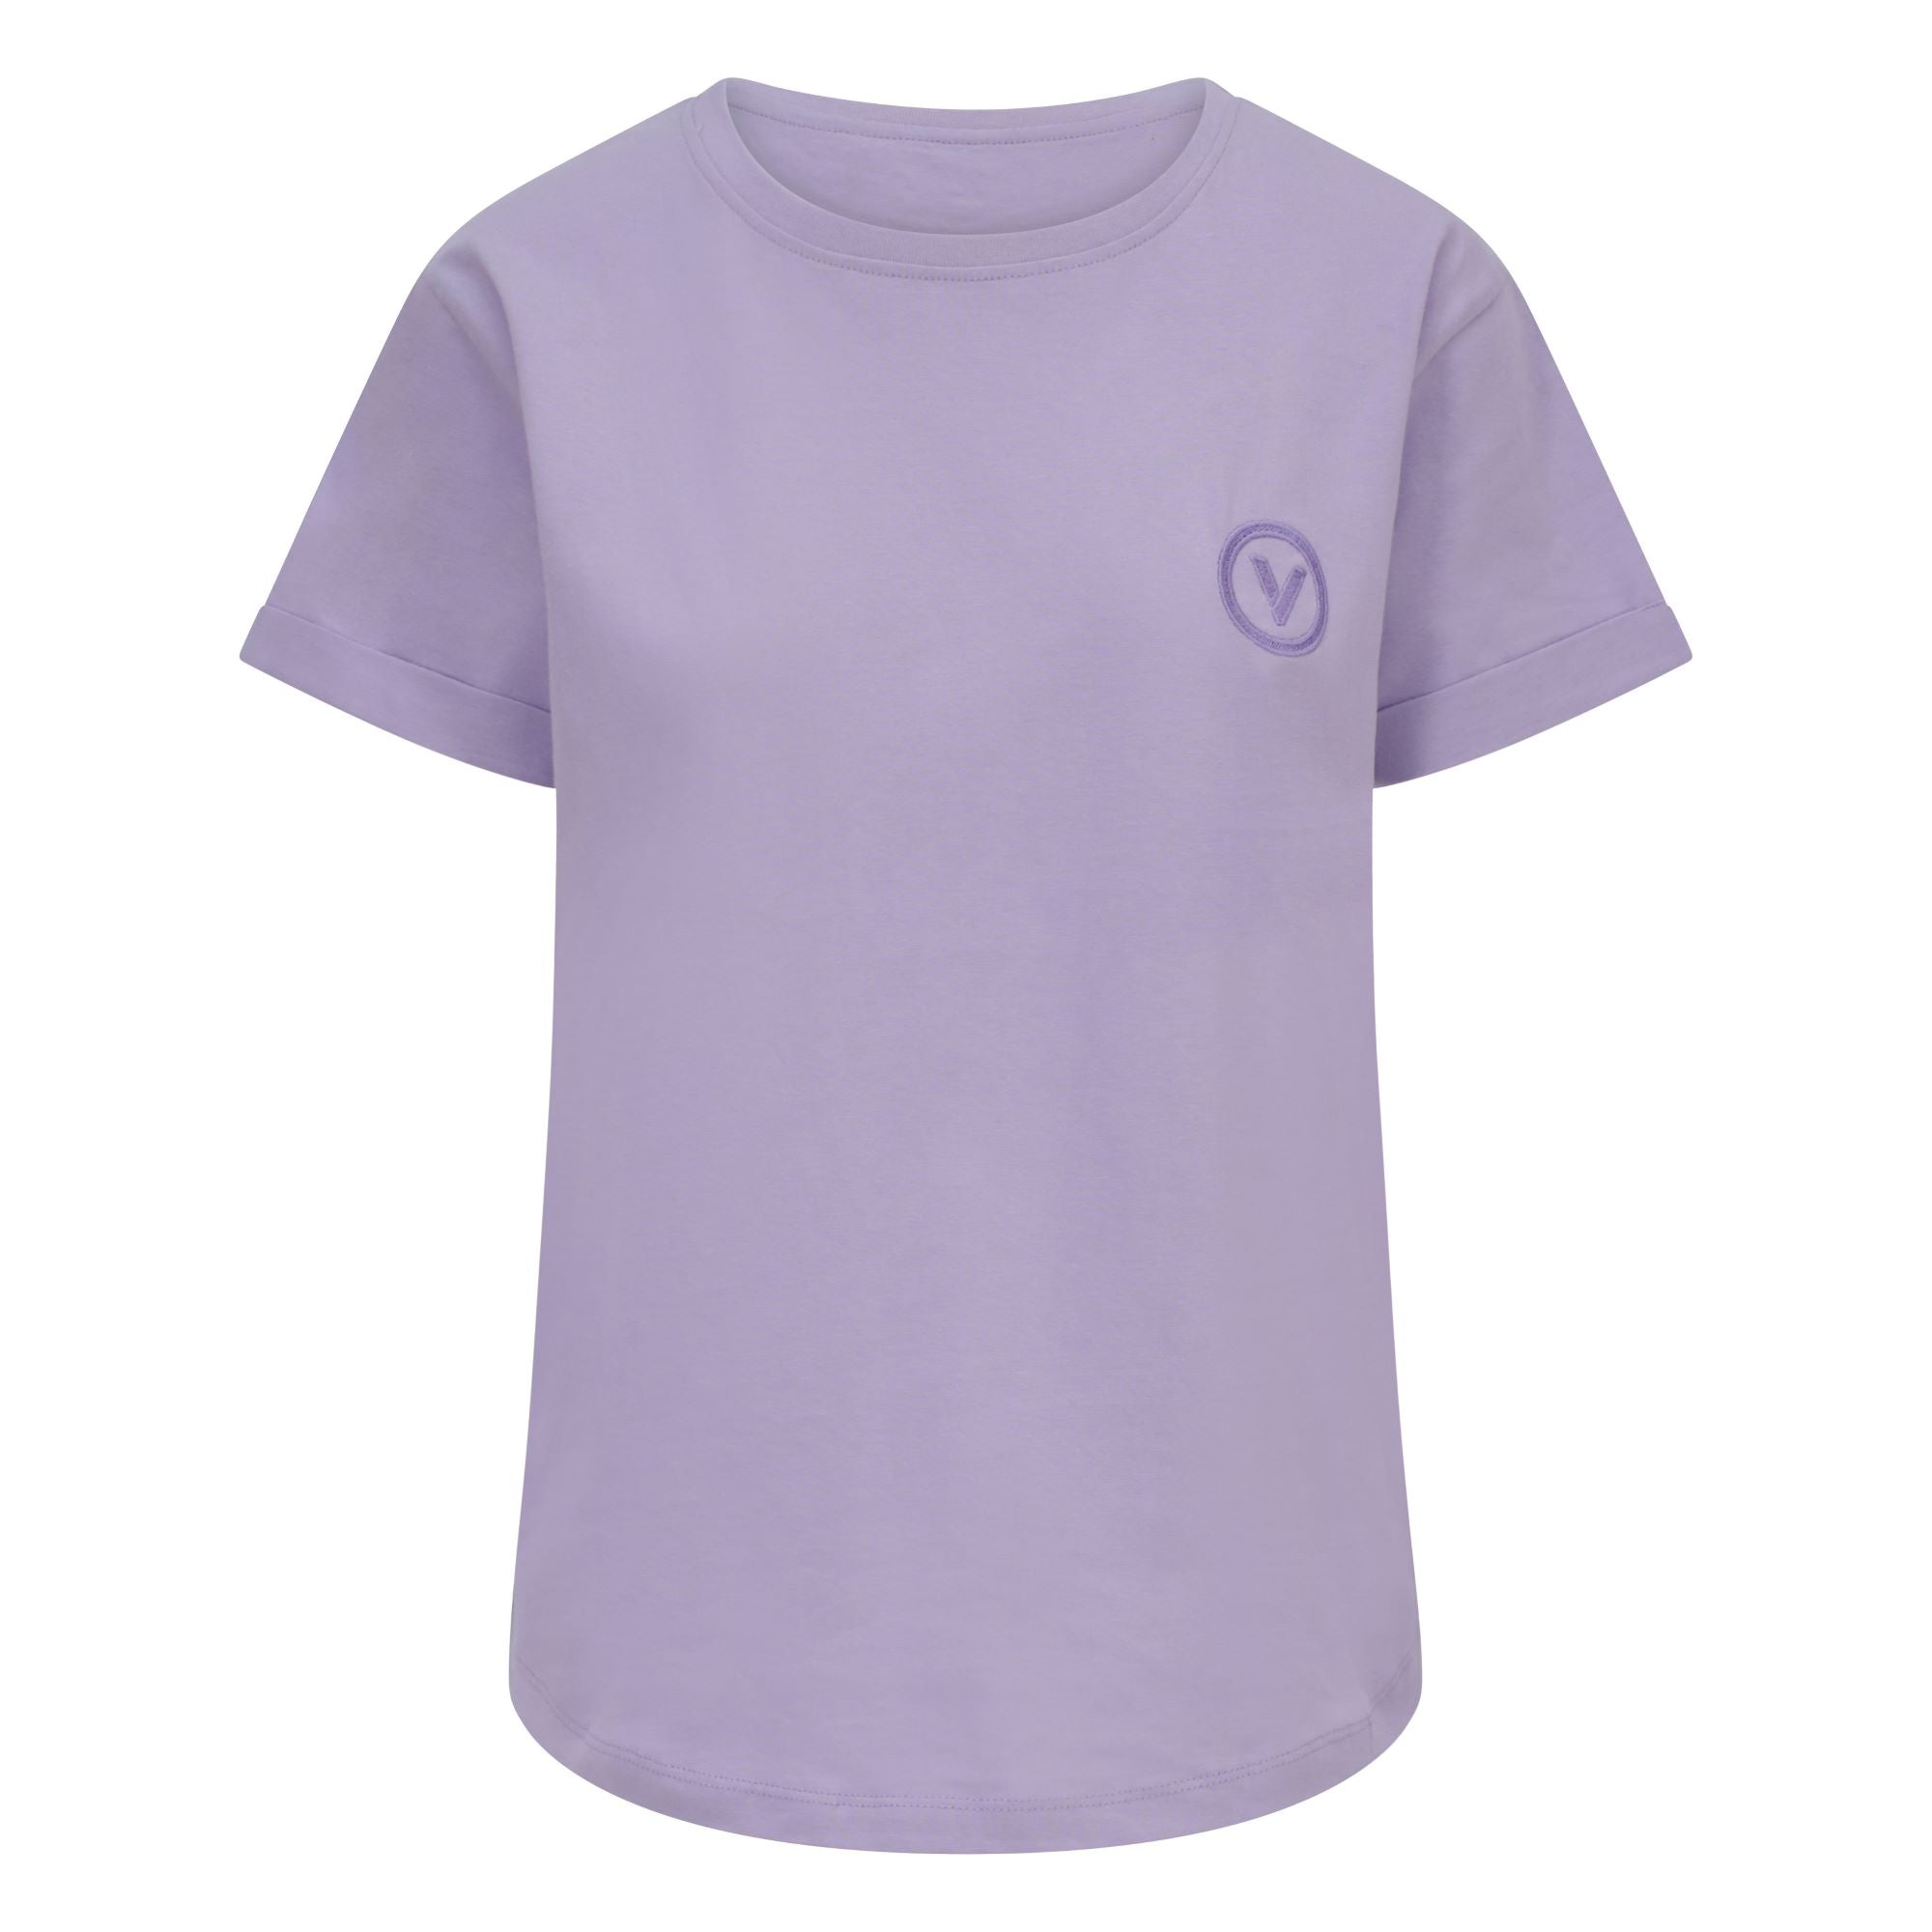 Validate Core Essentials Women's Rolled Sleeve TShirt Lilac